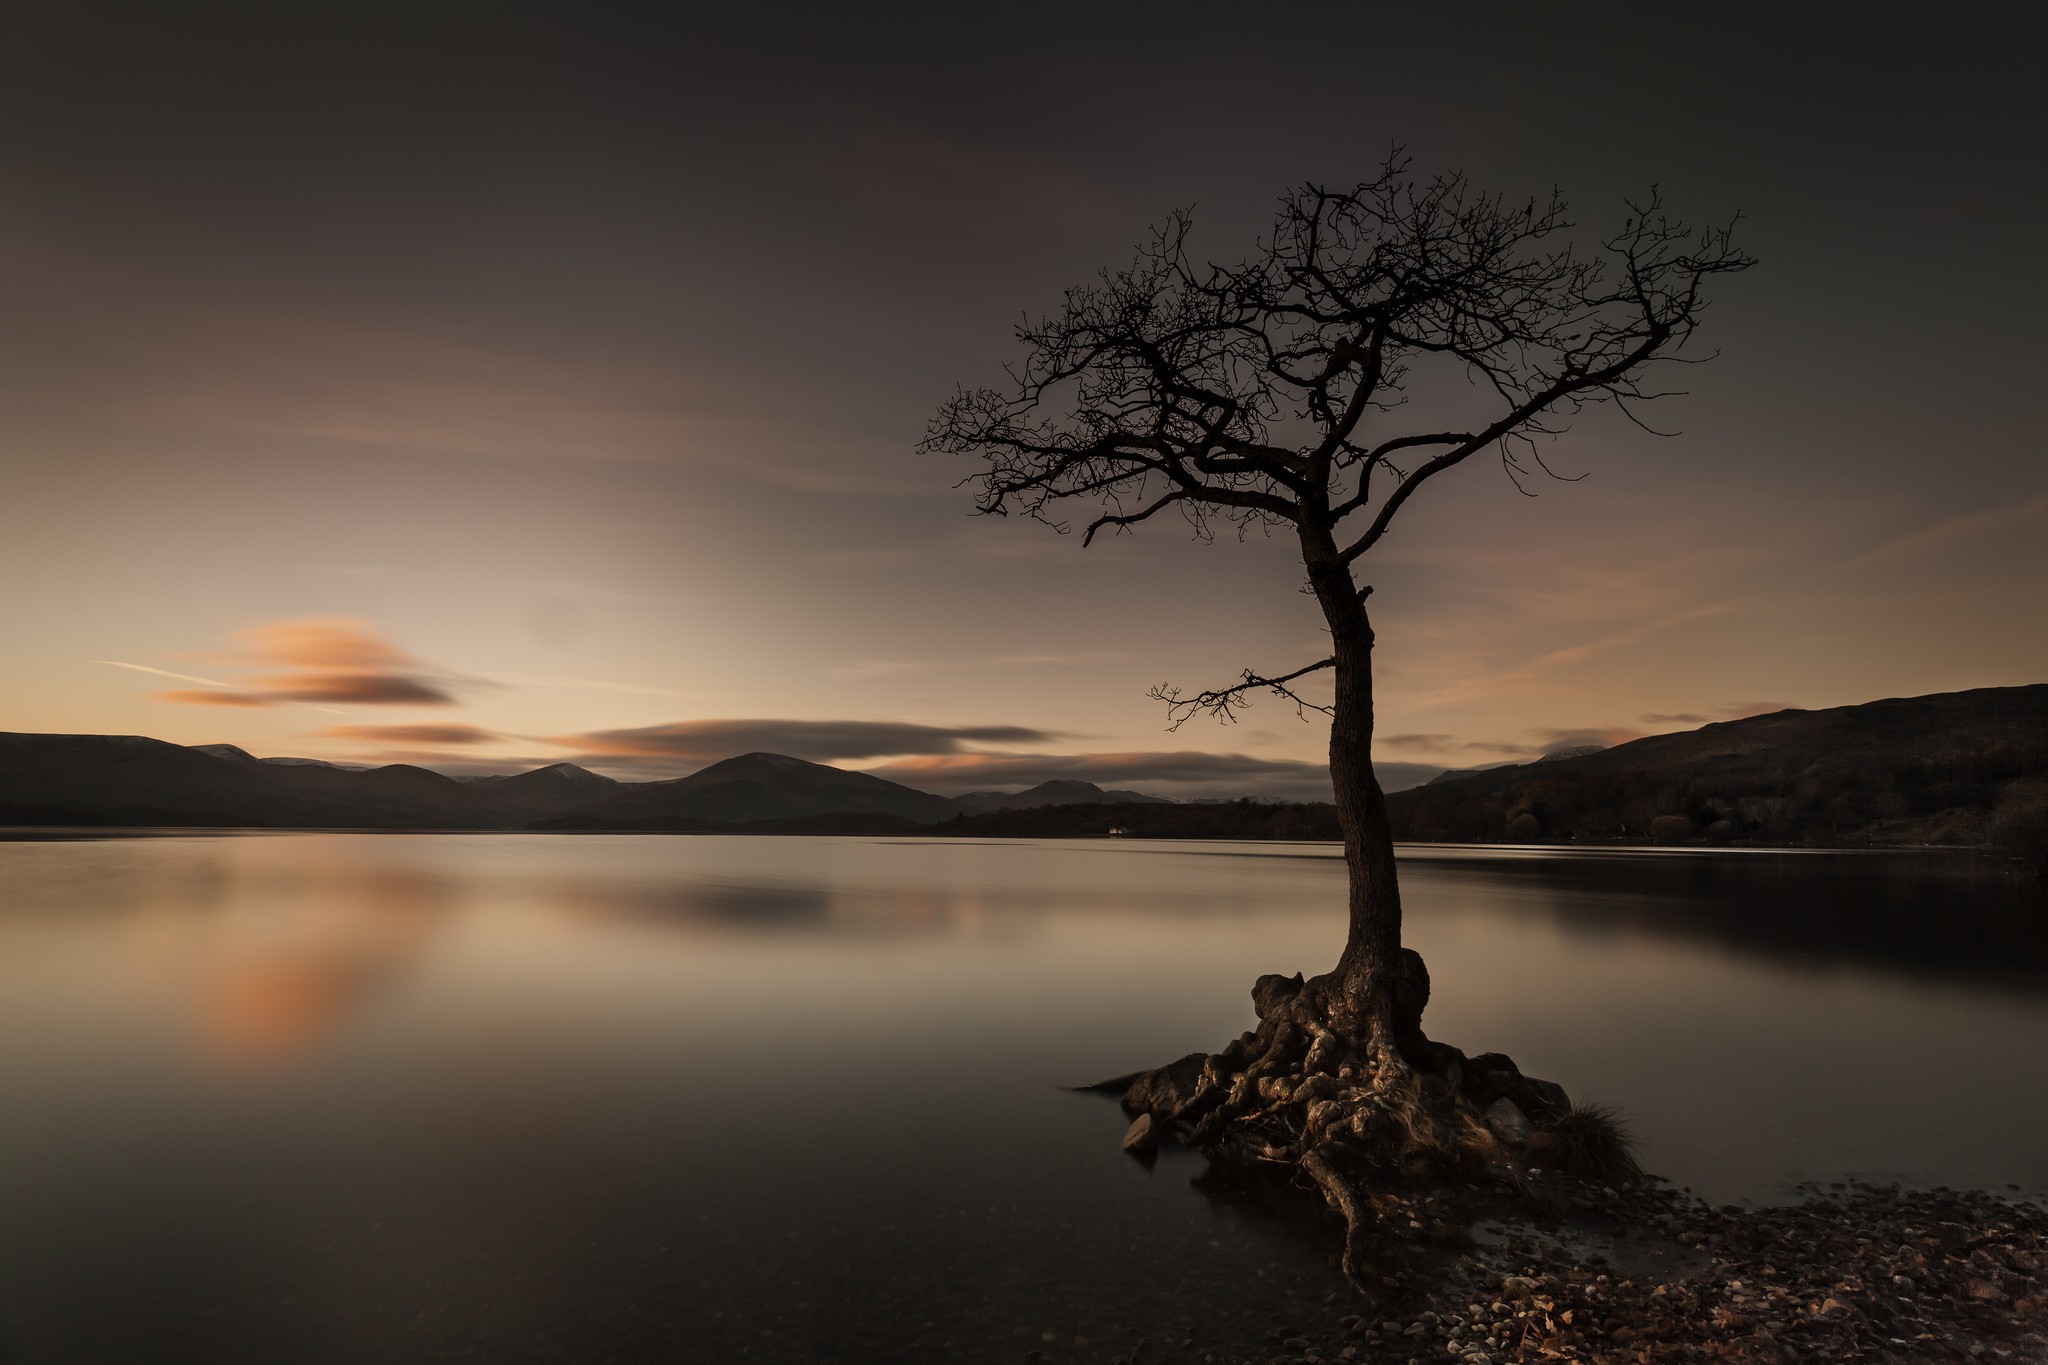 General 2048x1365 trees landscape long exposure lake dusk mountains calm waters water nature sky